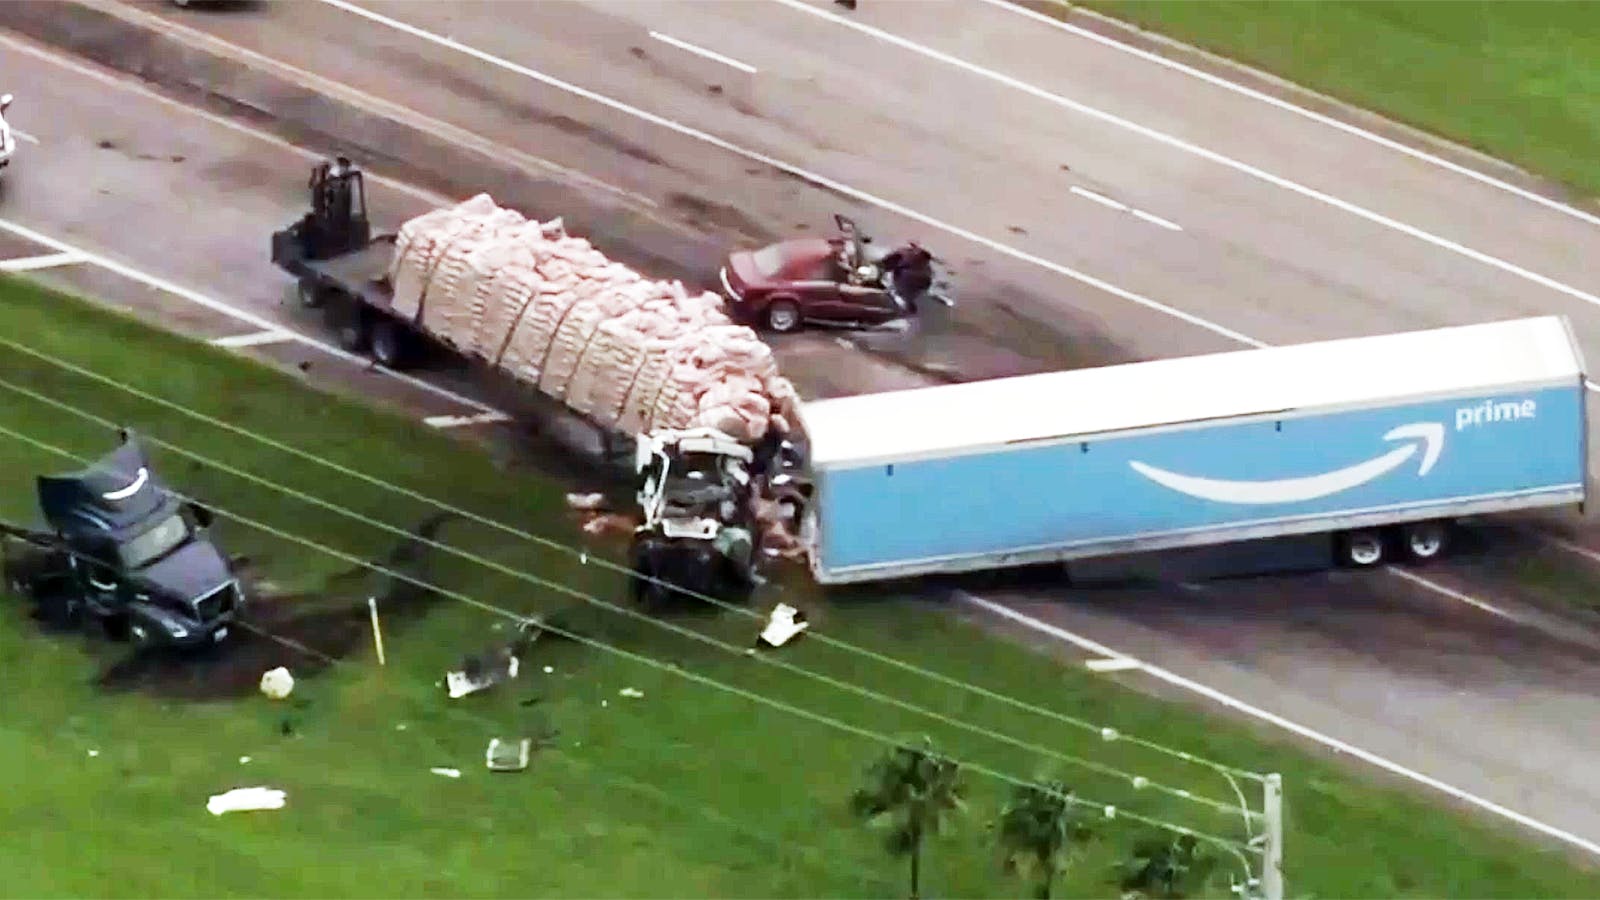 A still image from WPTV news footage of a truck crash last November in Palm Beach County, Fla. Image courtesy of WPTV